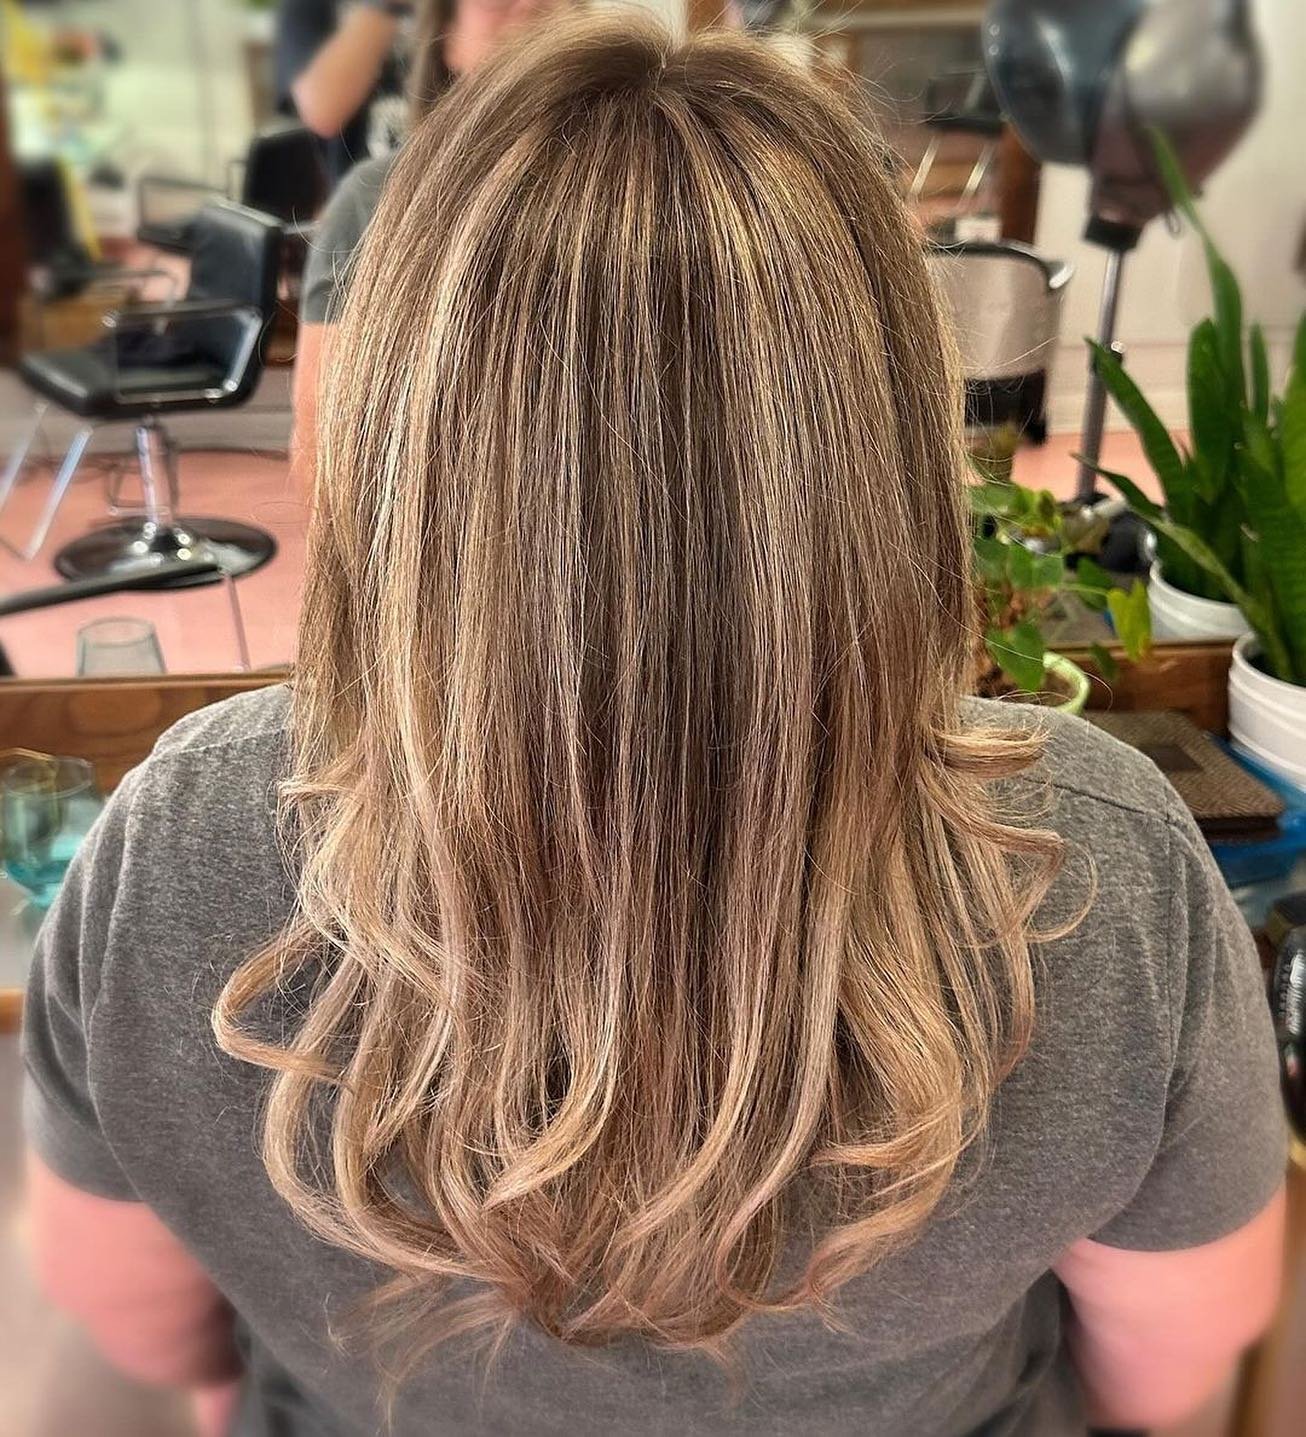 Balayage before &amp; after by our color expert @devinaidan_hair @thepowderroomla ✨💋

#thepowderroomla #losangeleshairstylist #lahairstylist #losangeles #frogtown #hollywoodhairstylist #balayage #blonde #plantbasedhaircare